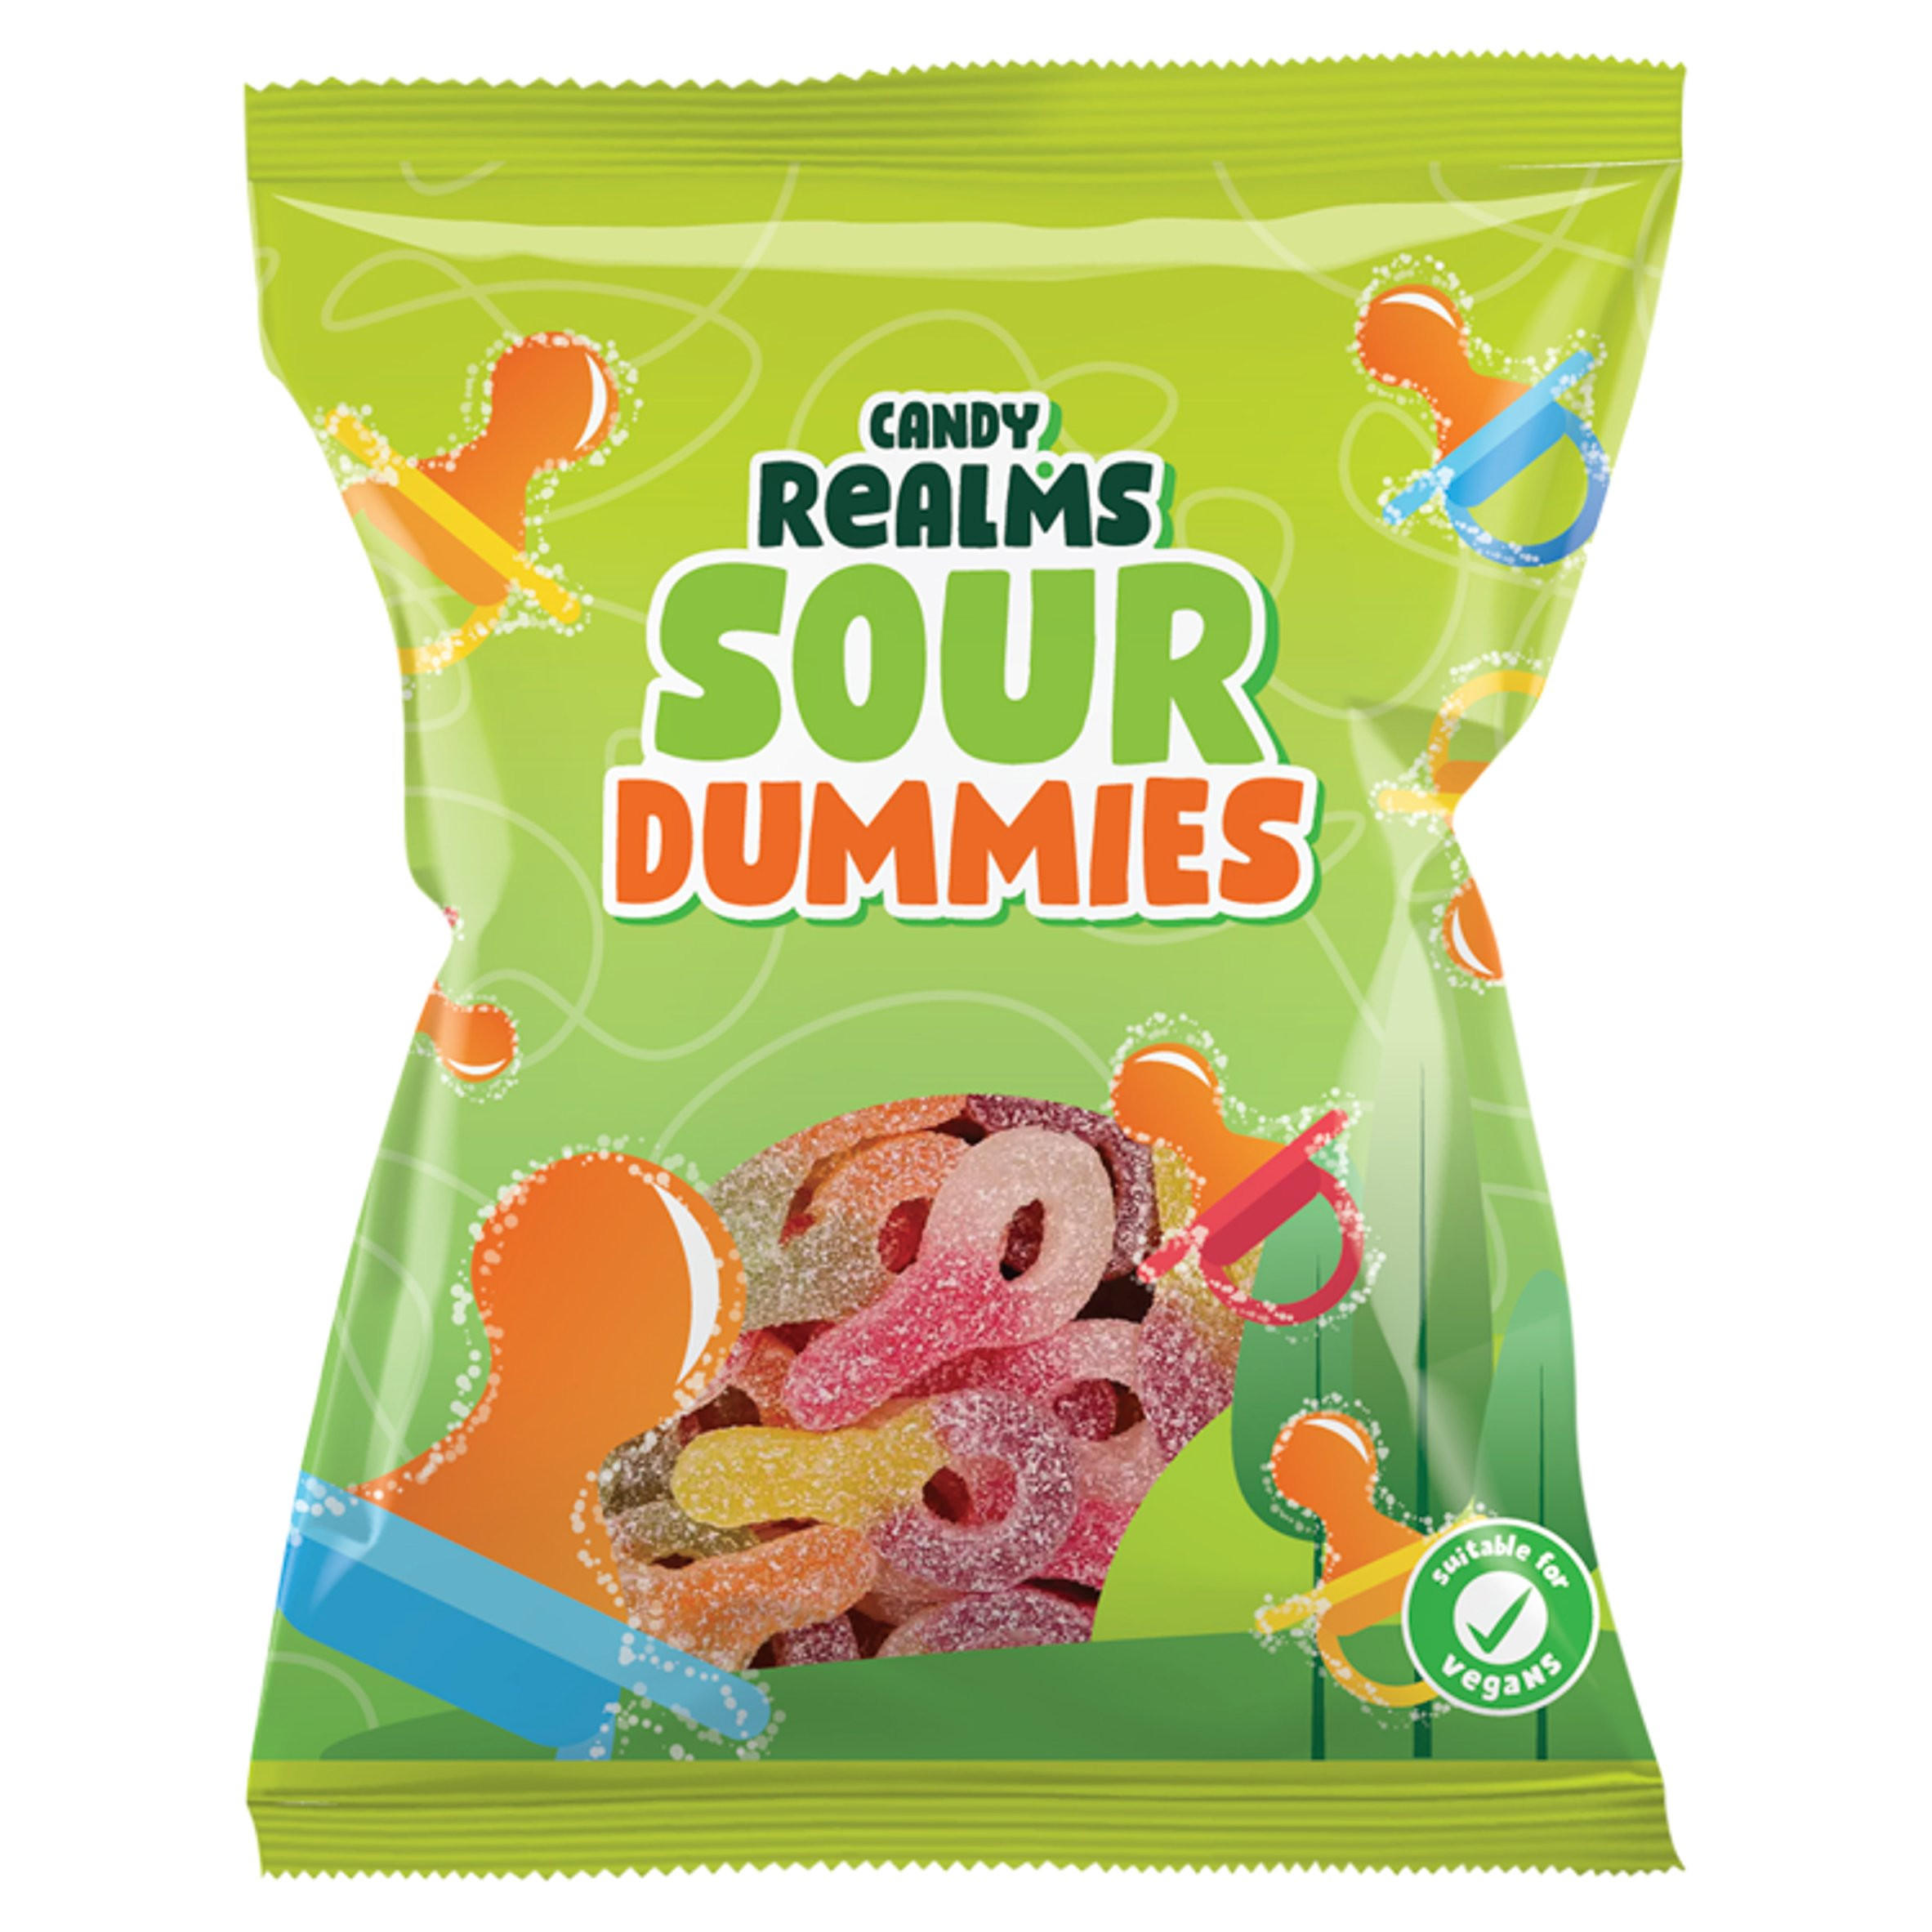 Candy Realms Sour Dummies 190g | Sweets | Iceland Foods